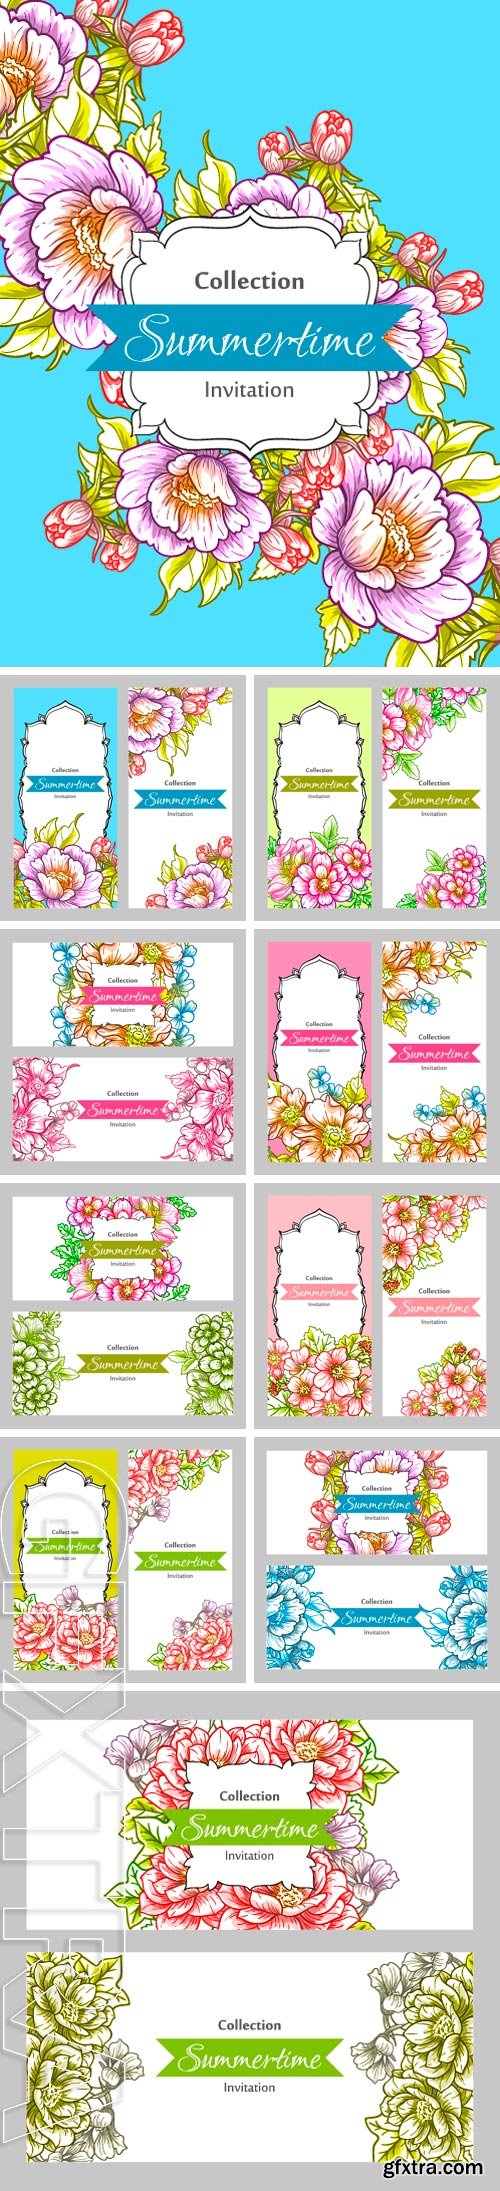 Stock Vectors - Summertime collection. Romantic botanical invitation. Greeting card with floral background